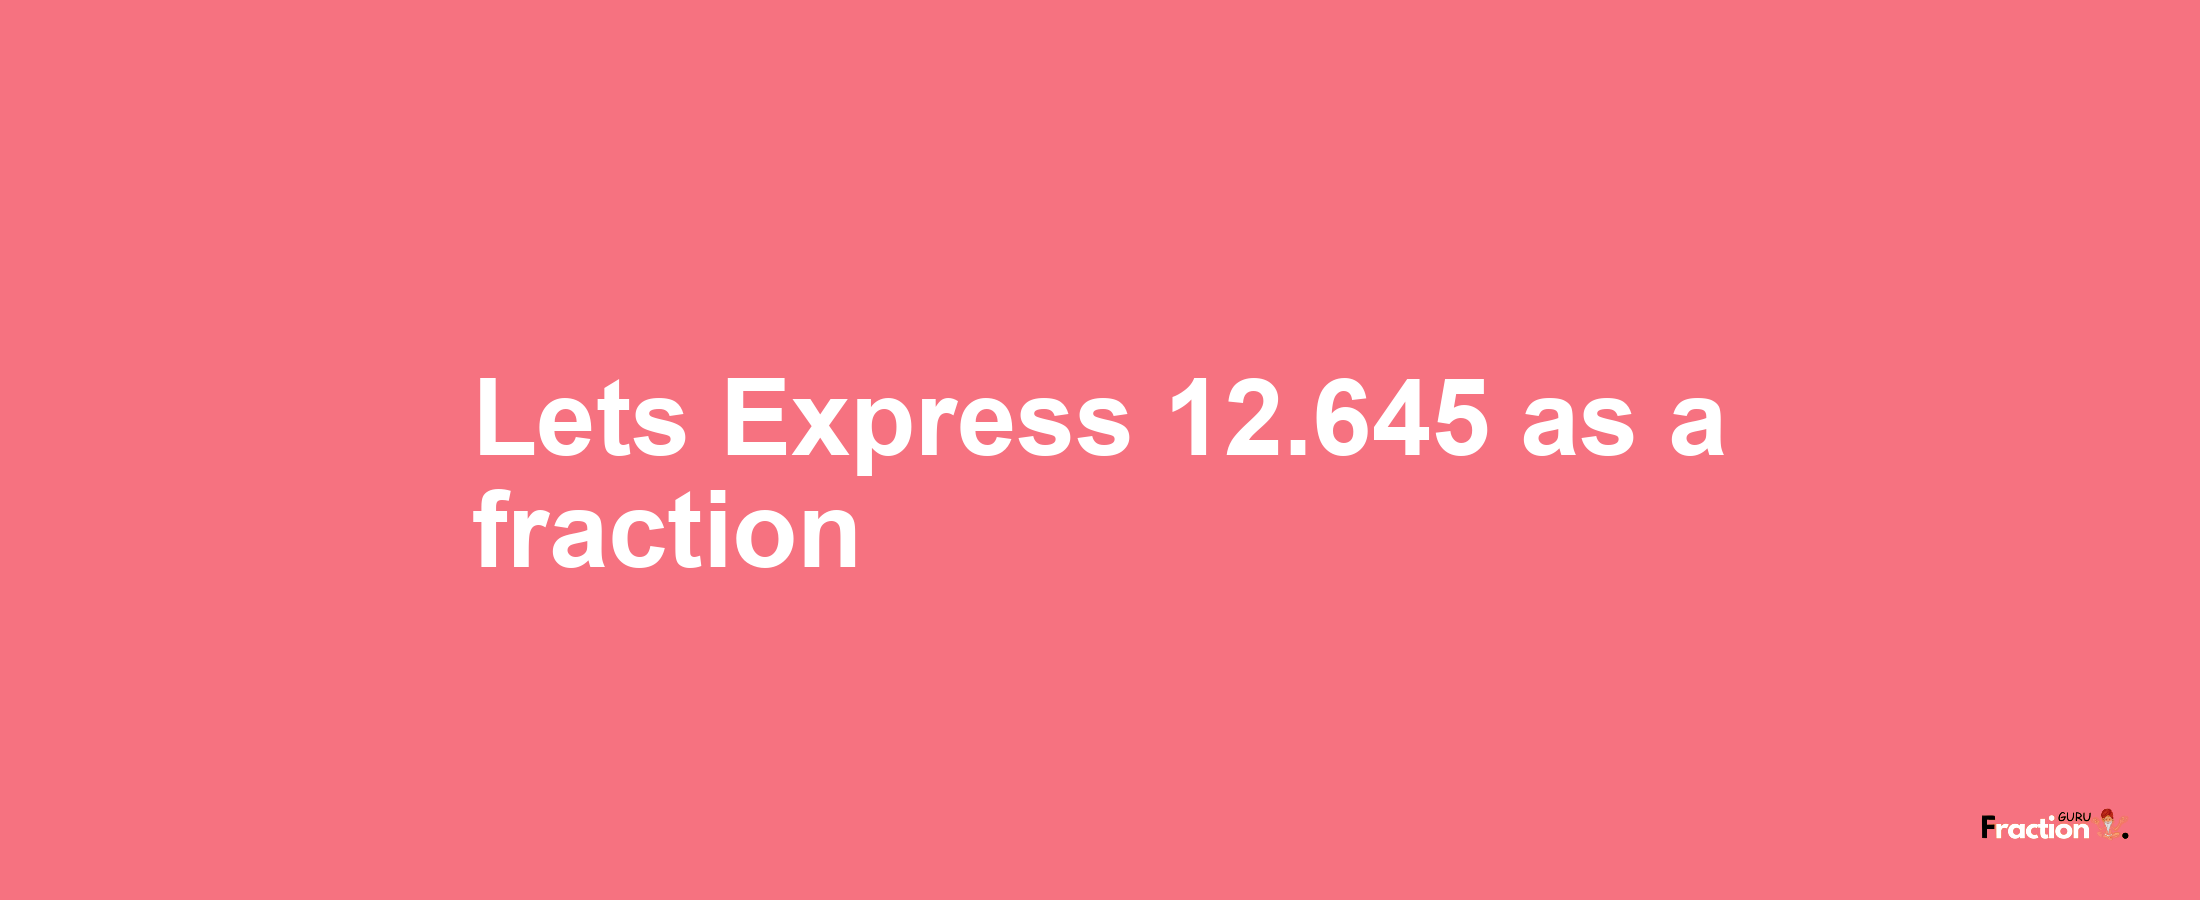 Lets Express 12.645 as afraction